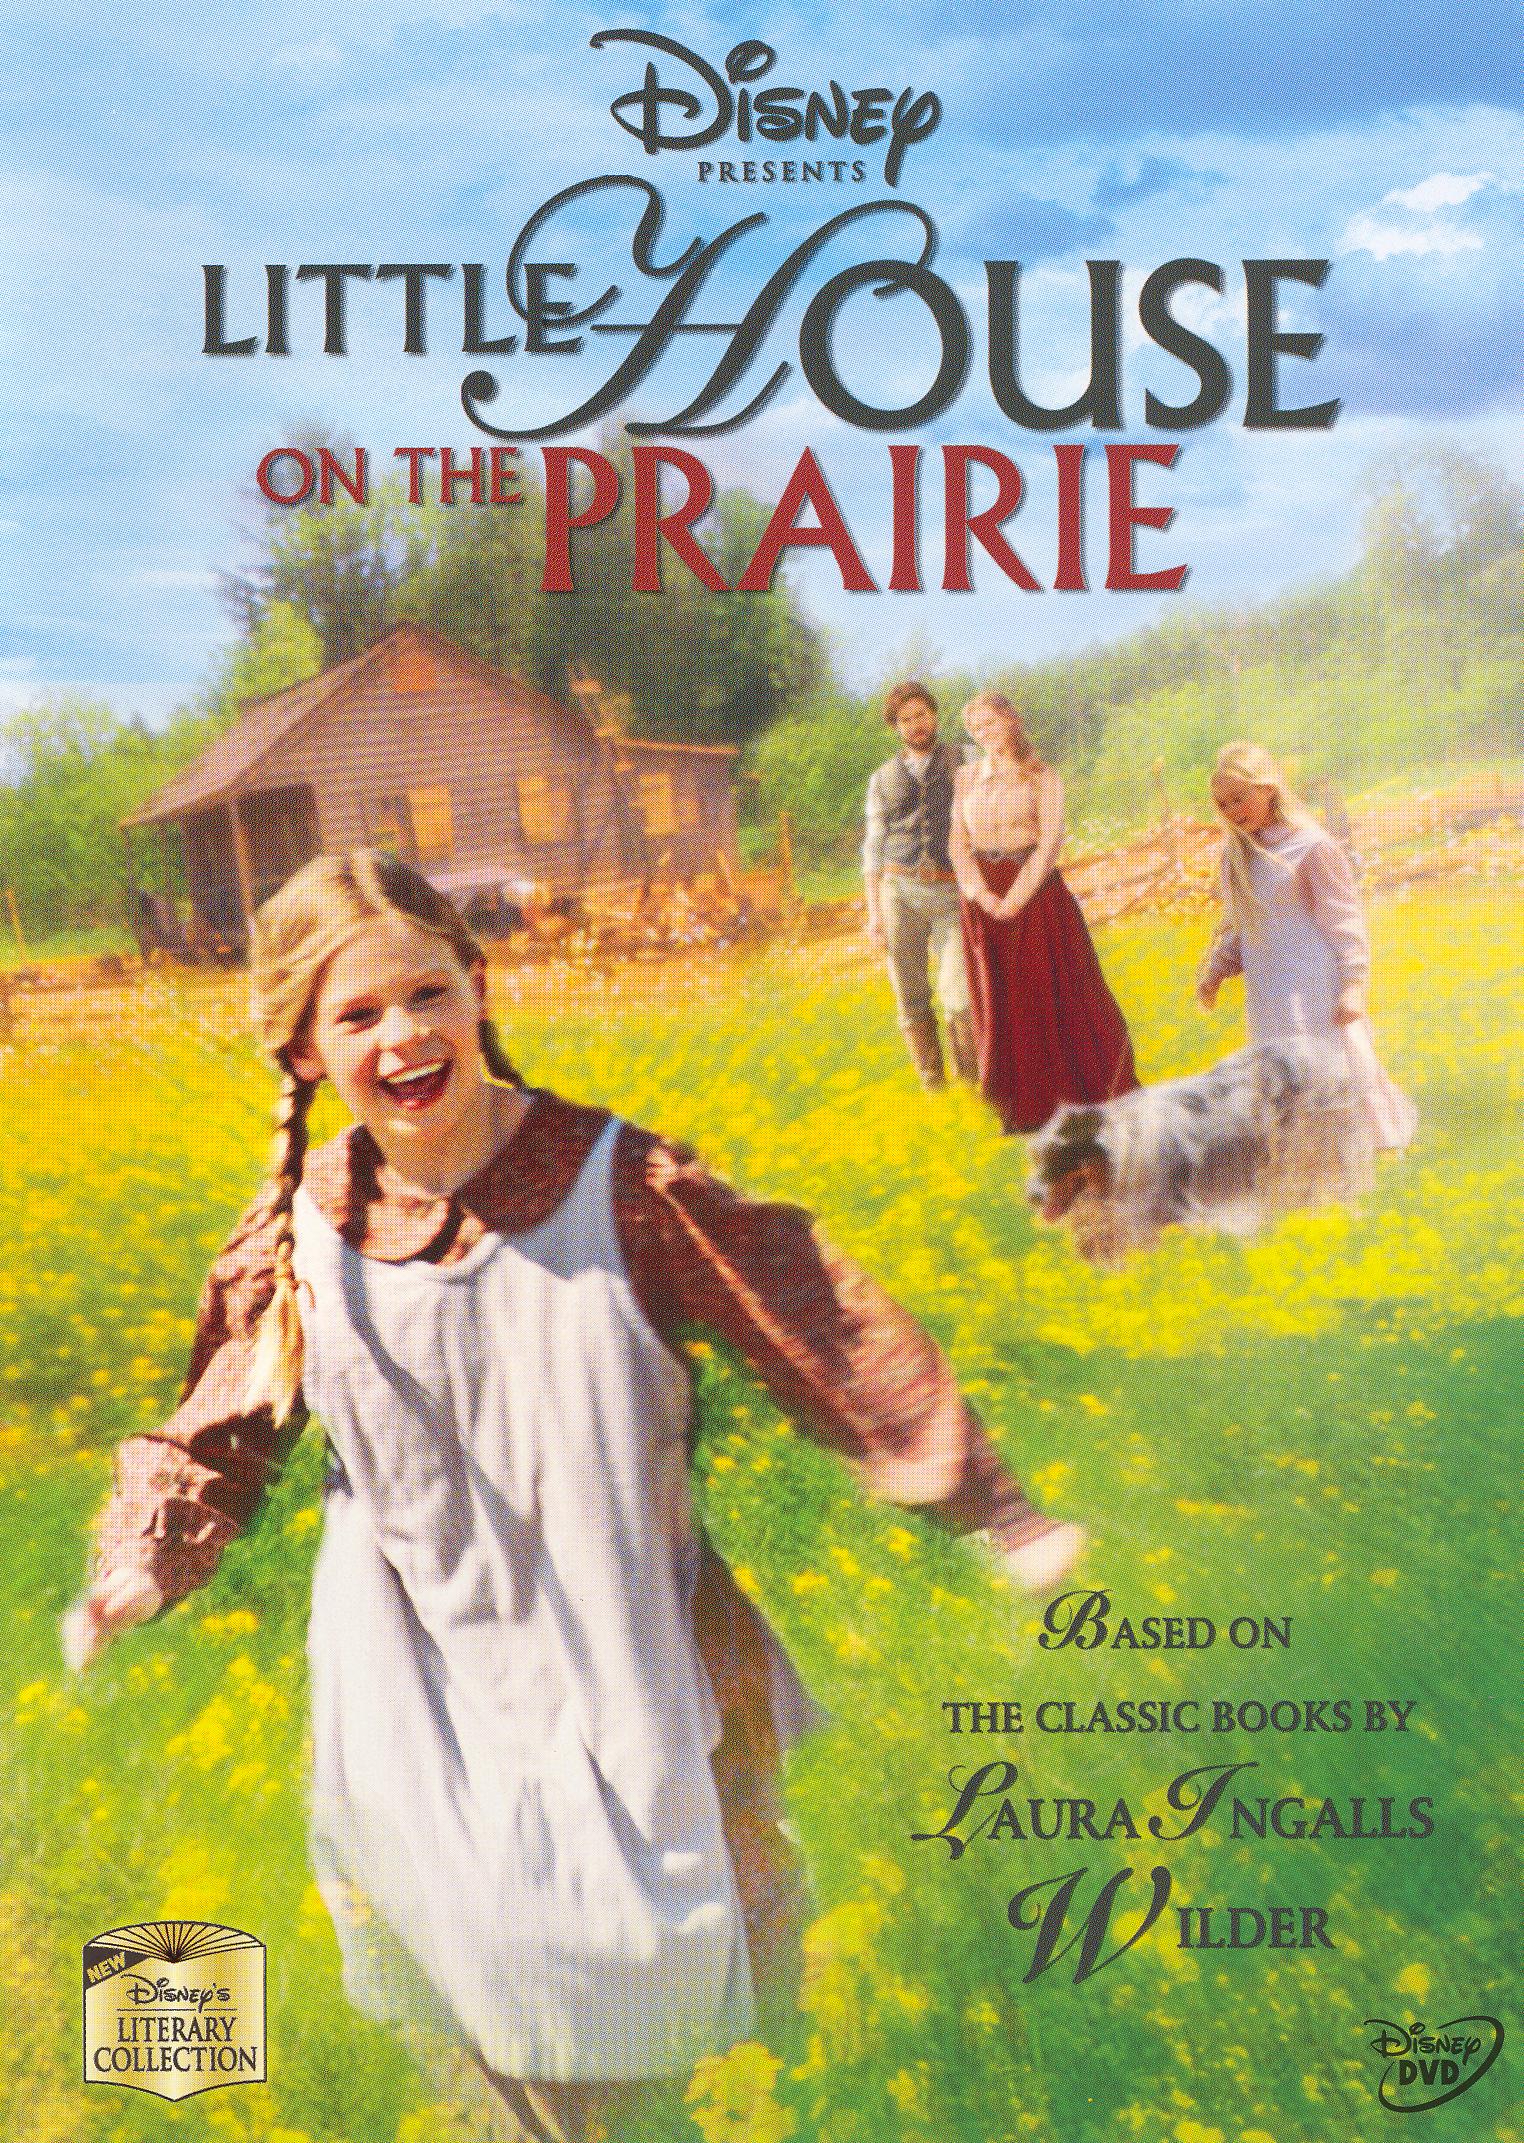 The Little House on the Prairie [2 Discs] [DVD] [2005] - Best Buy